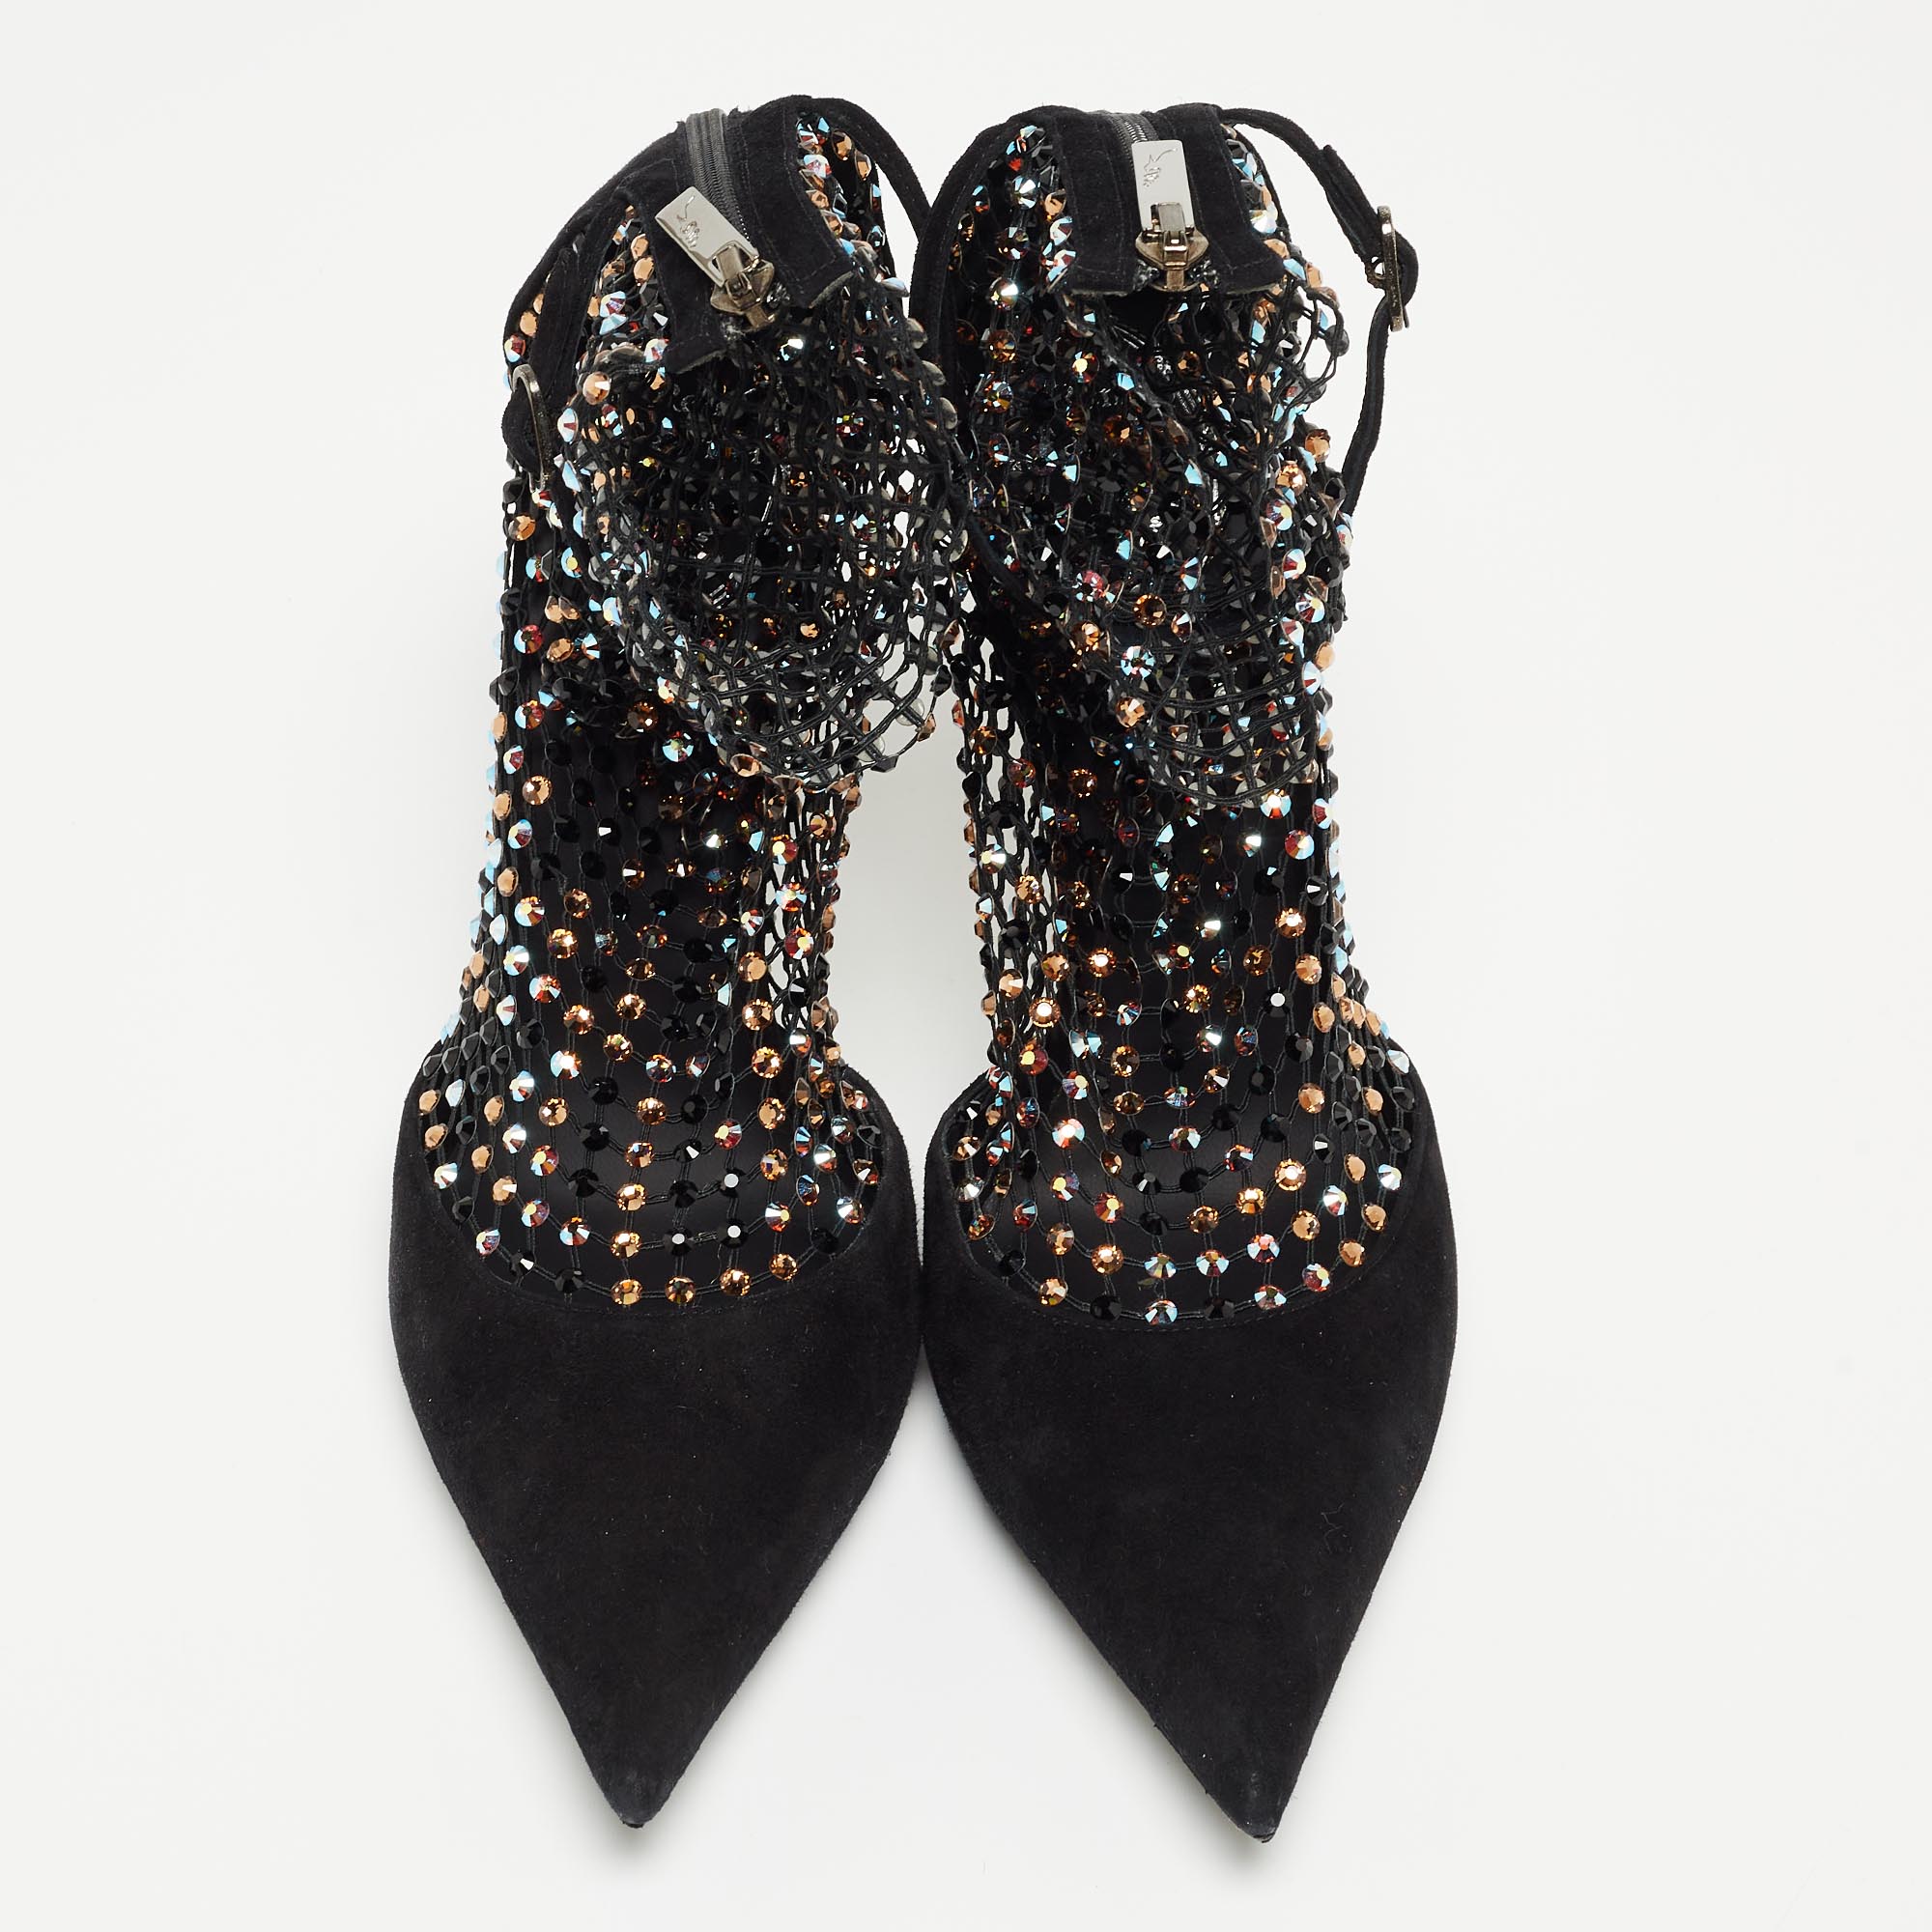 Rene Caovilla Black Suede And Mesh Crystal Embellished Galaxia Pointed Toe Ankle Strap Booties Size 39